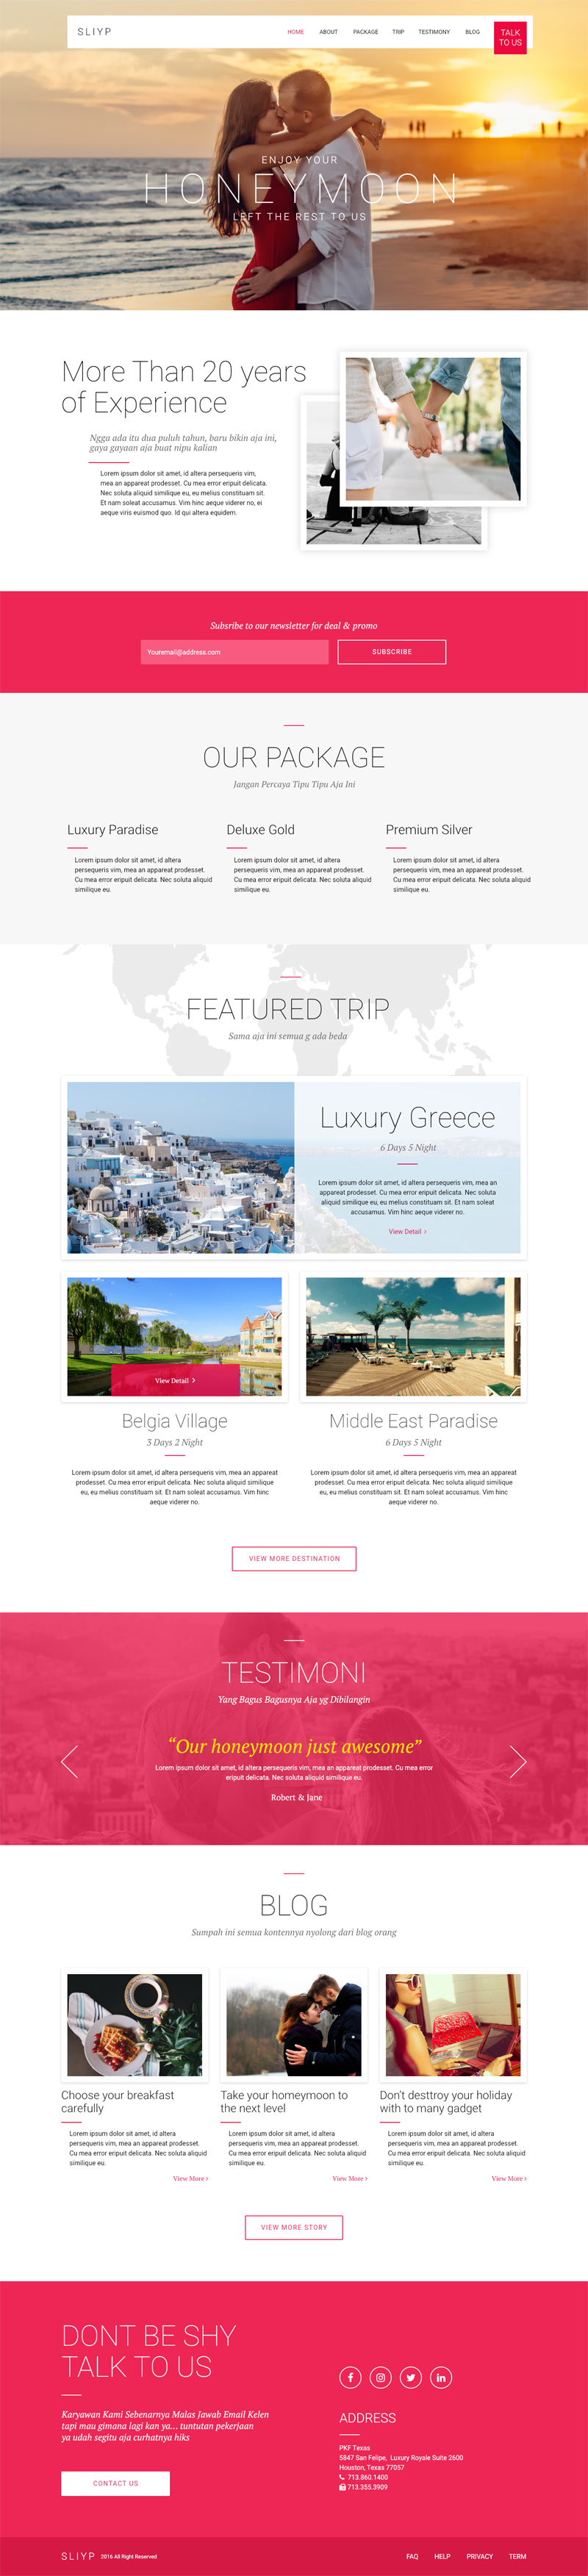 Sliyp Travel Agency Landing Page made with Adobe XD